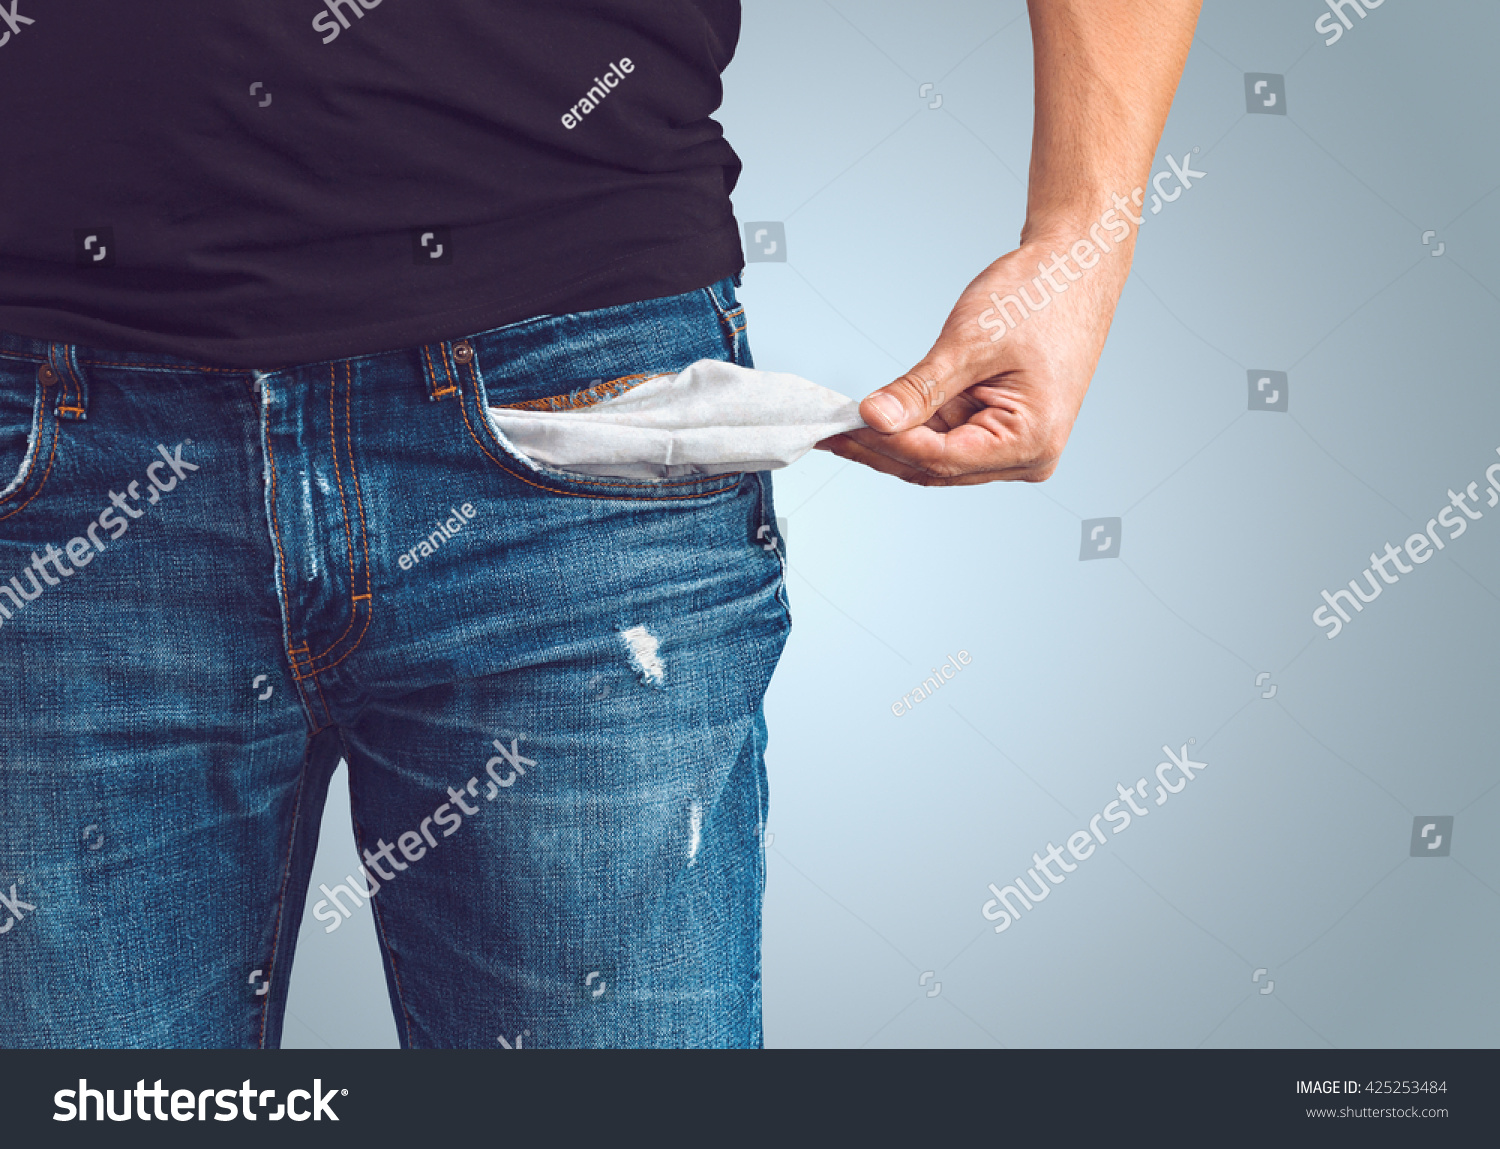 Poor man in jeans with empty pocket #425253484